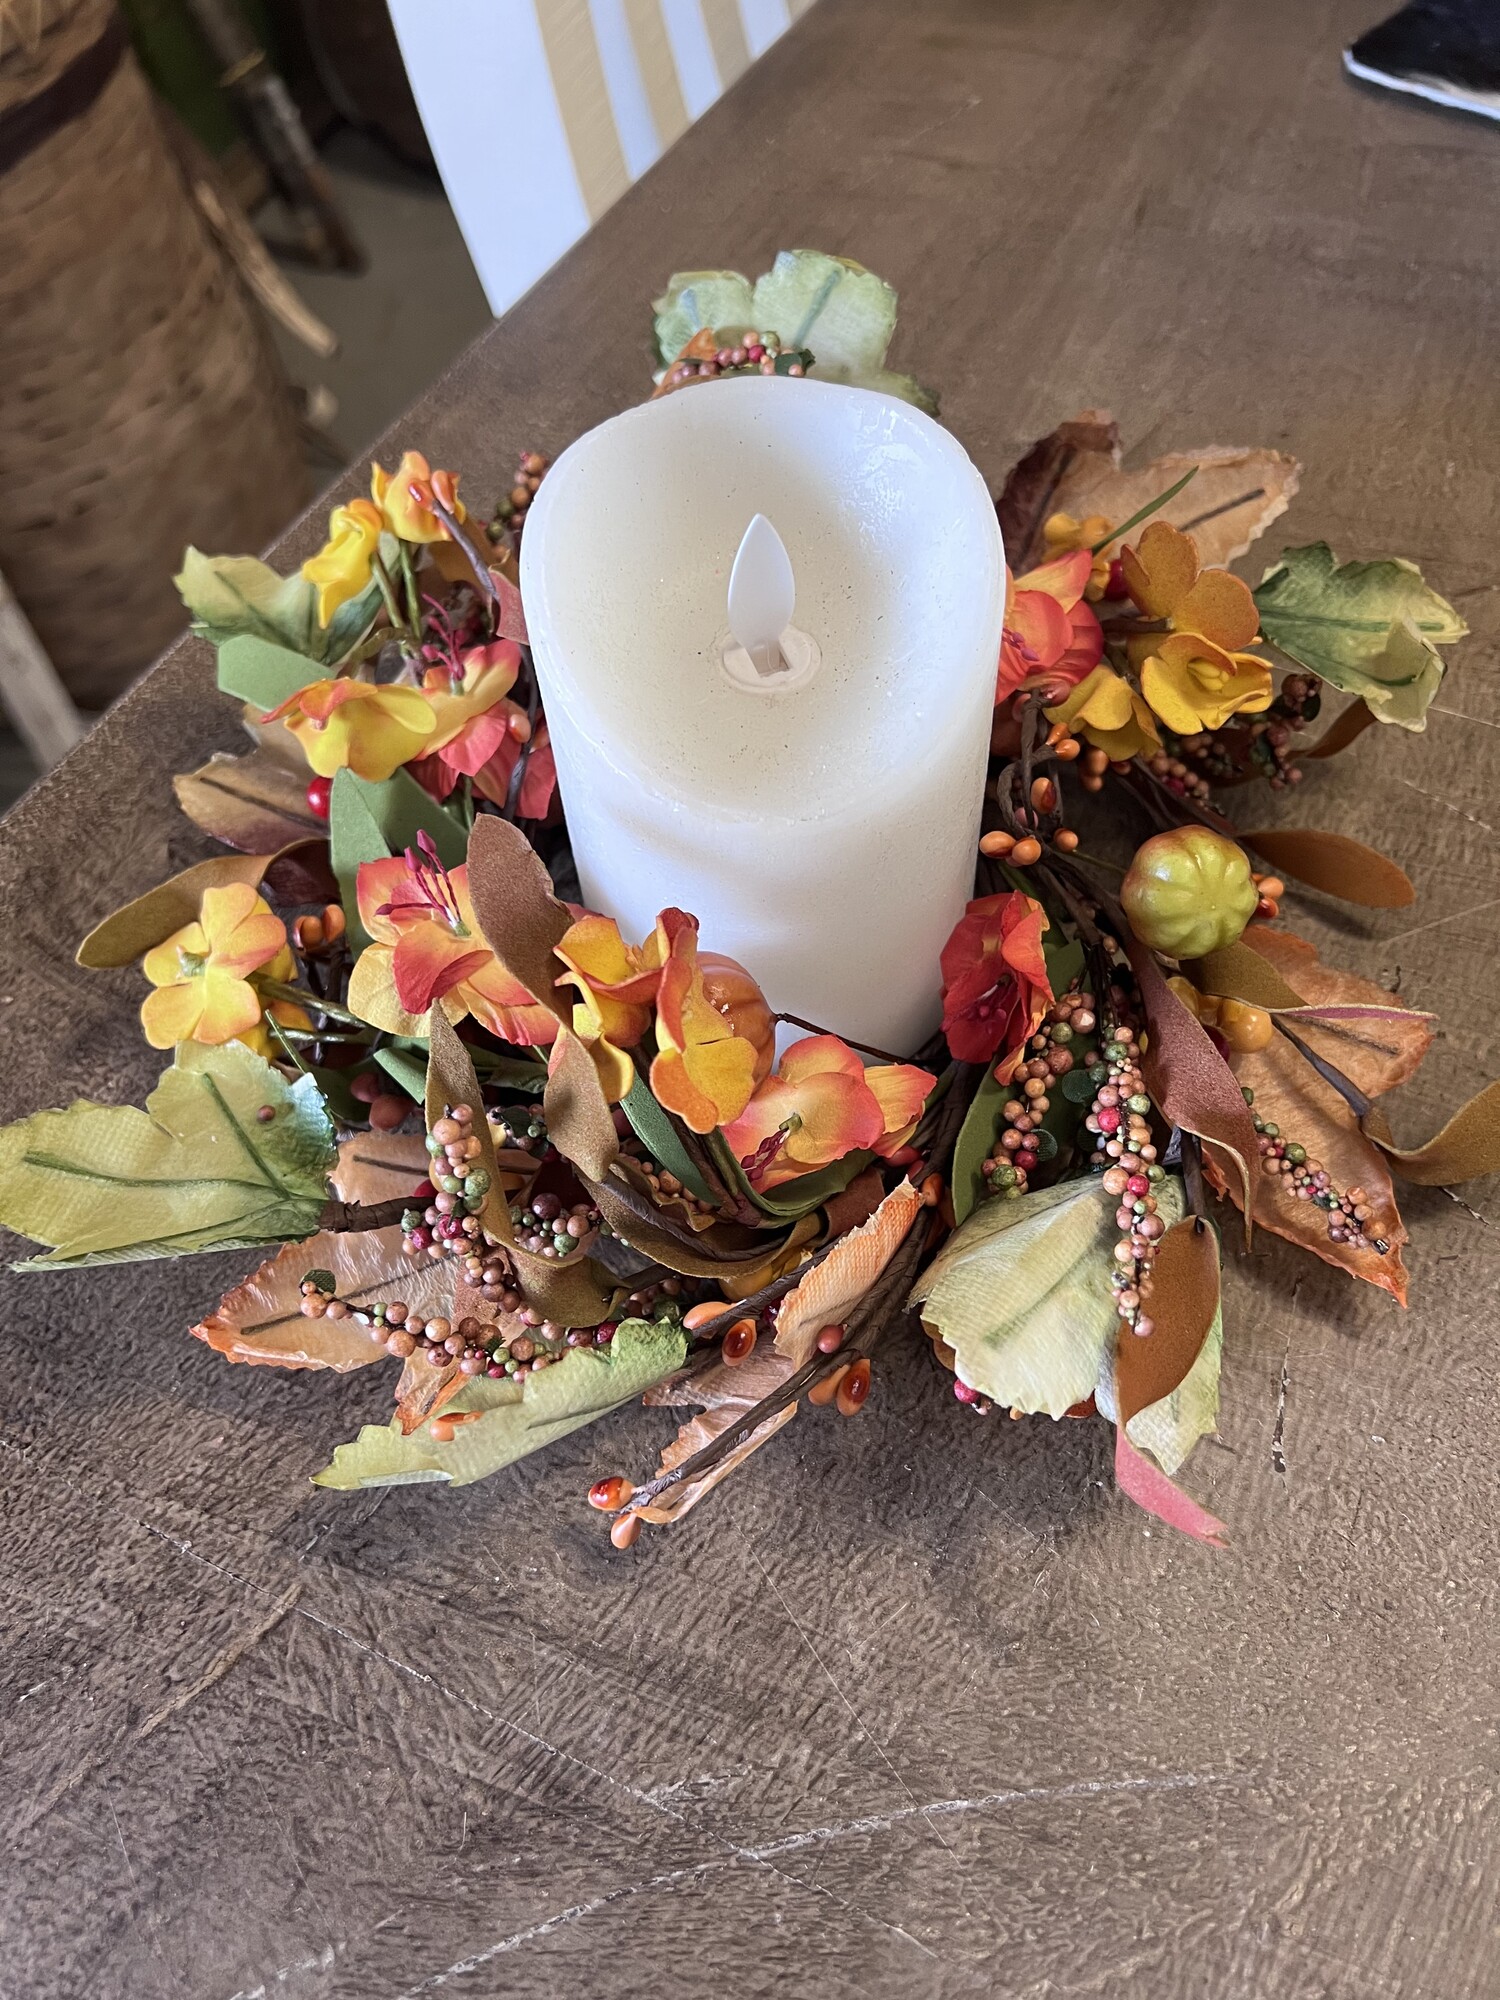 Harvest Garden ring has fall flowers combined with mini pumpkins,  pips,  berries,  leaves and spirals. Pair it with a jar or pillar candle for a pretty fall look.  Ring has an inside diameter of 4 inches and is approximately 10 inches outside